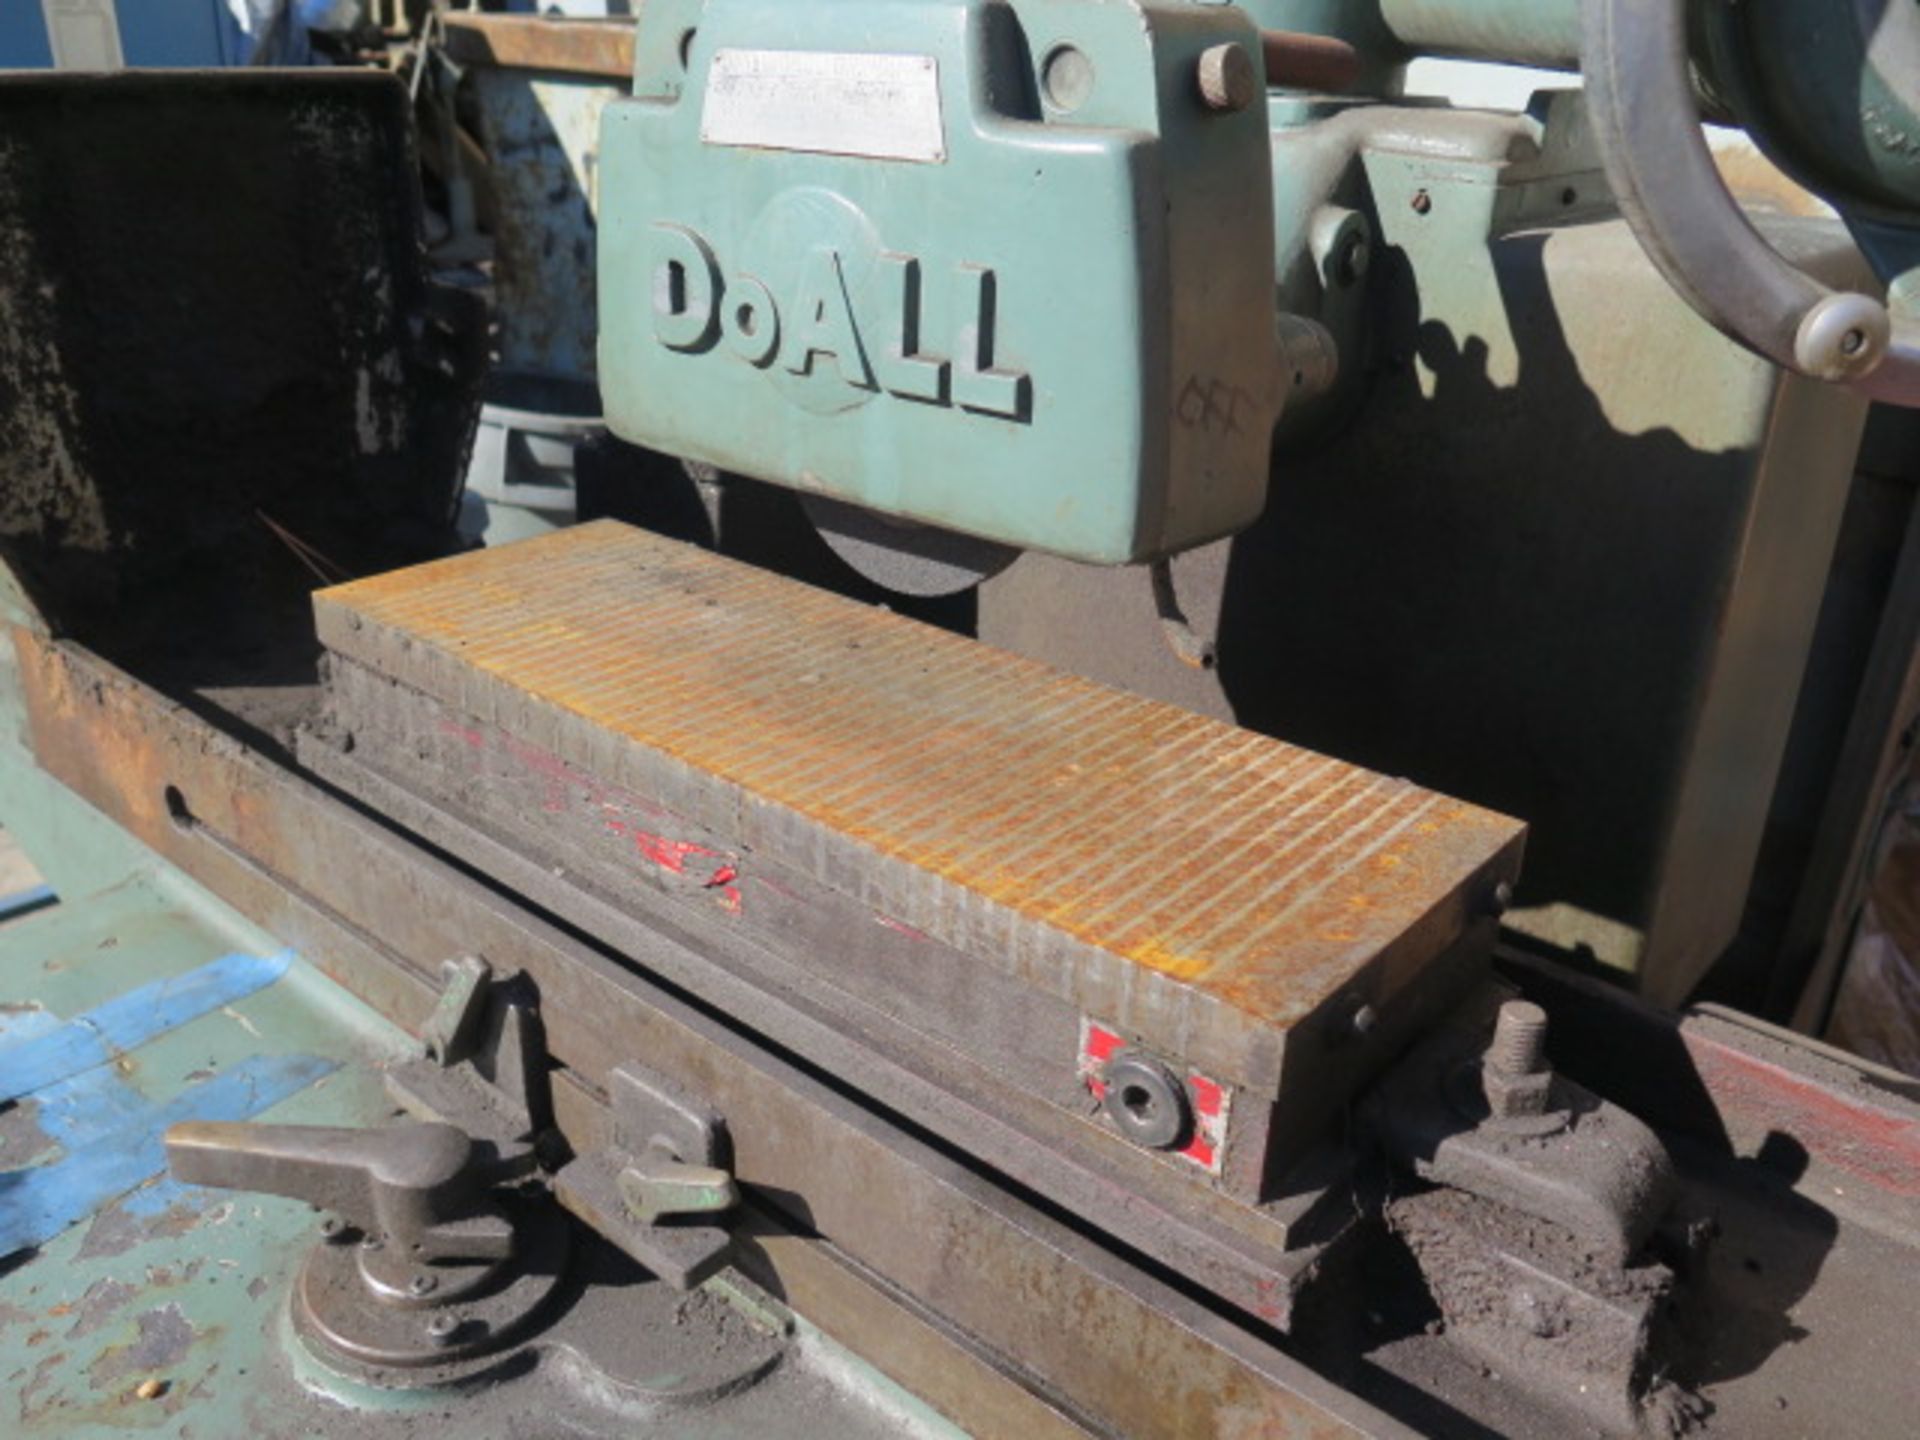 DoAll D-6 6” x 18” Automatic Hydraulic Surface Grinder s/n 3957882 w/ Auto Cycles, SOLD AS IS - Image 3 of 8